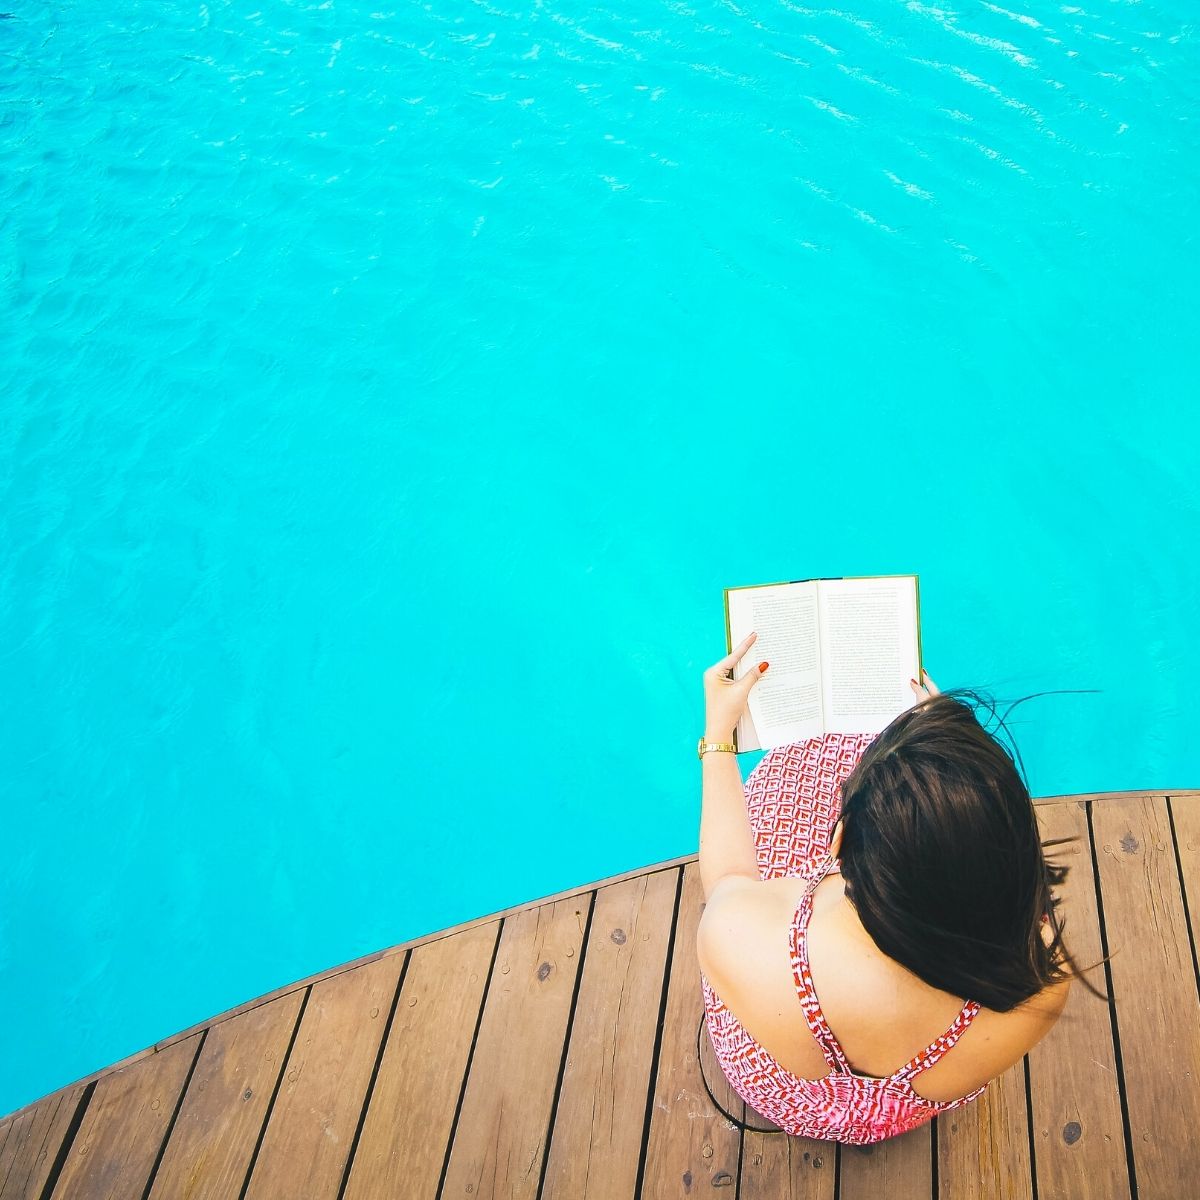 A woman reads her book at the edge of a big blue pool.